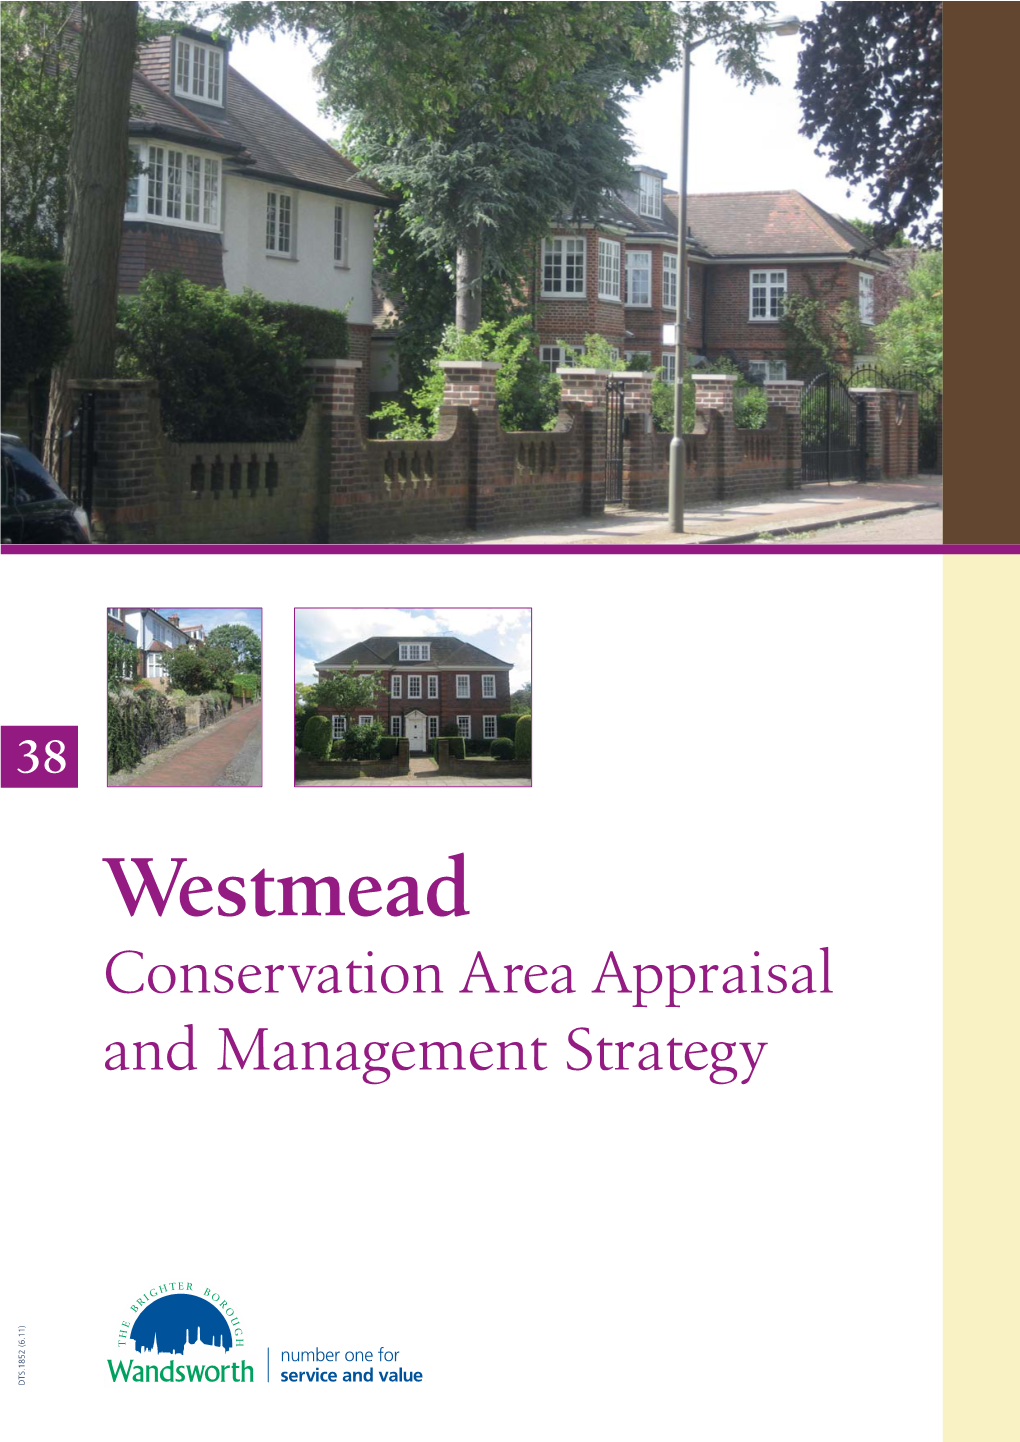 Westmead Conservation Area Appraisal & Management Strategy